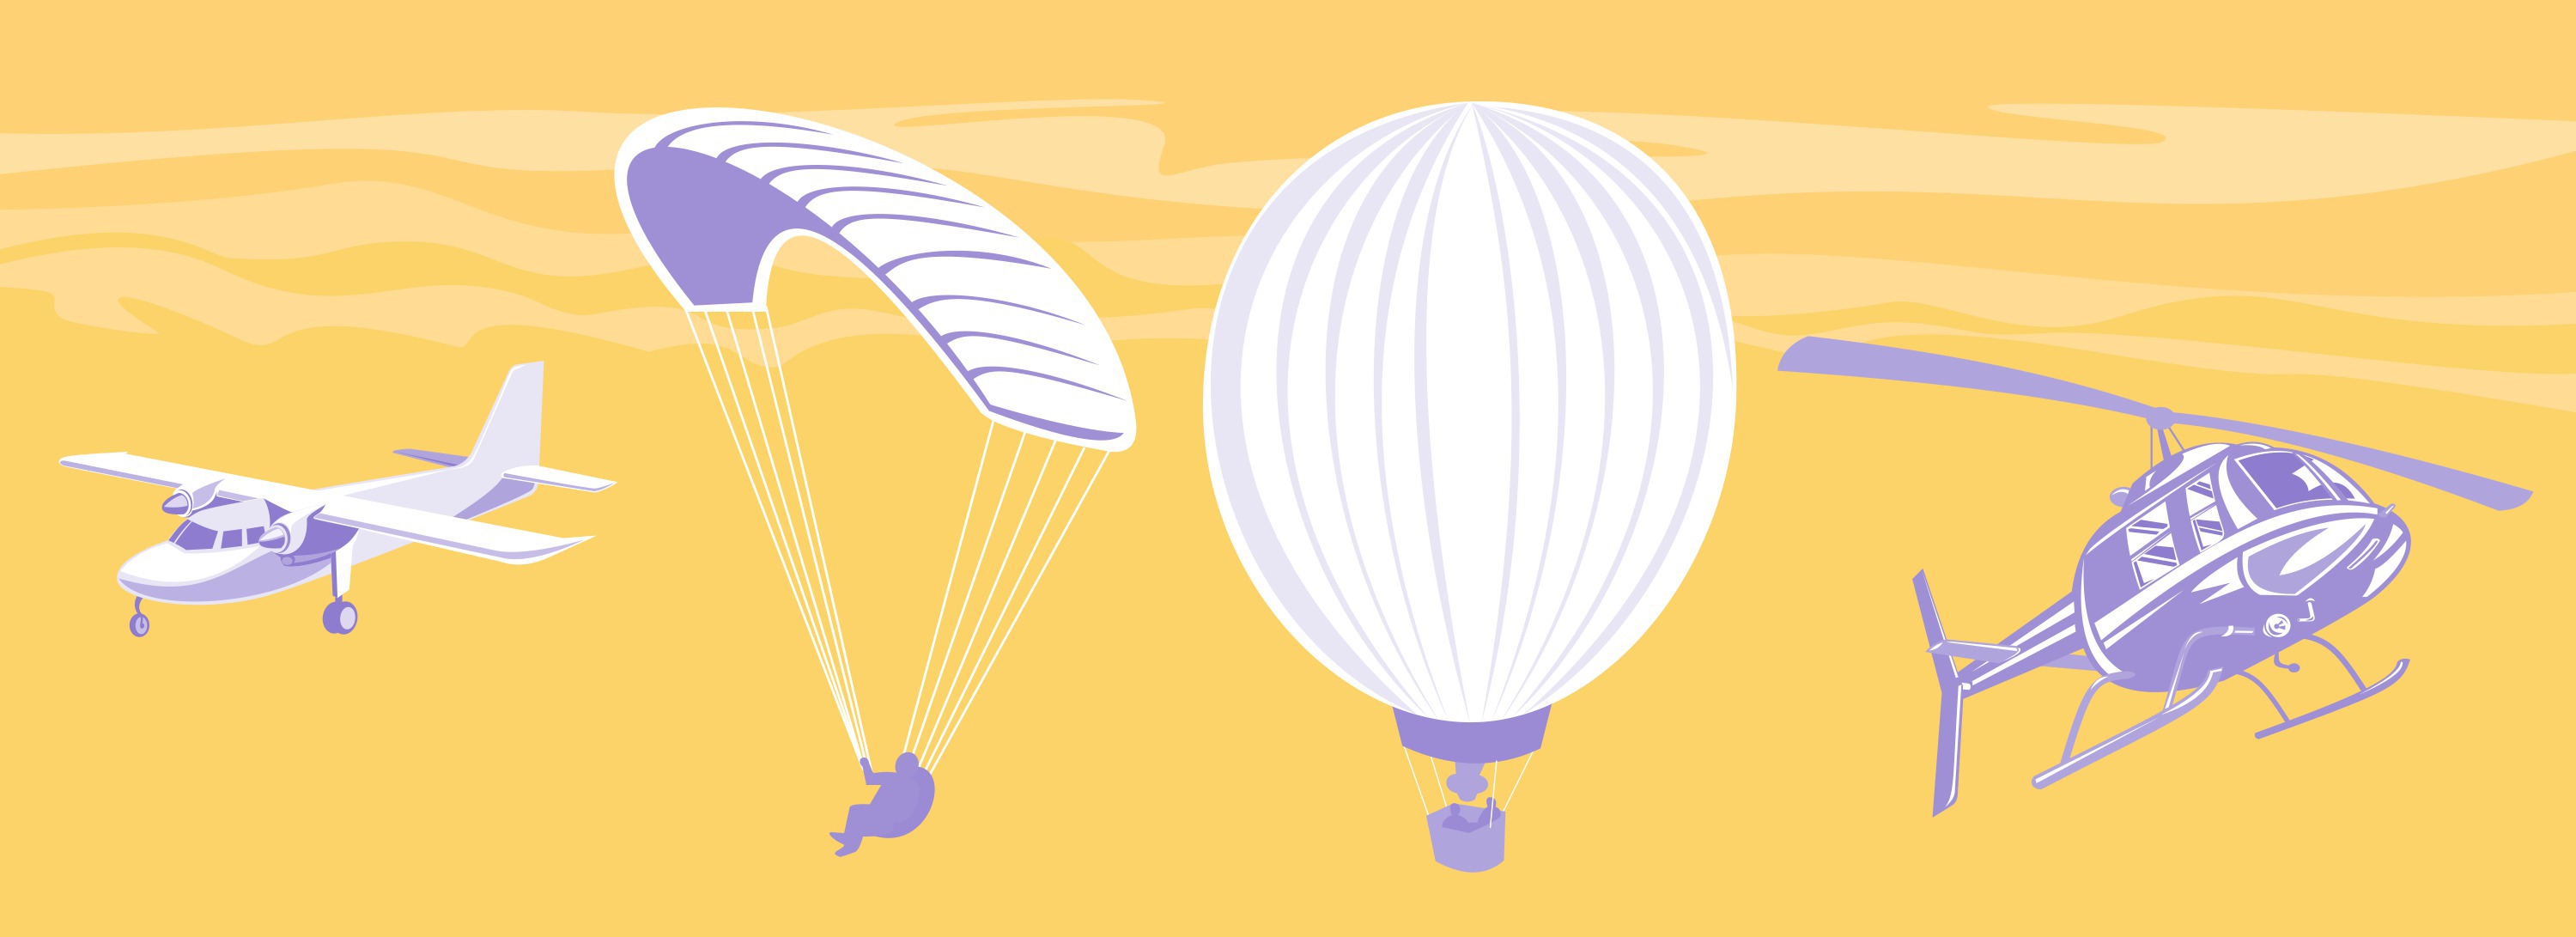 airplane-parachute-hot-air-balloon-helicopter_fyp9s8IO_L